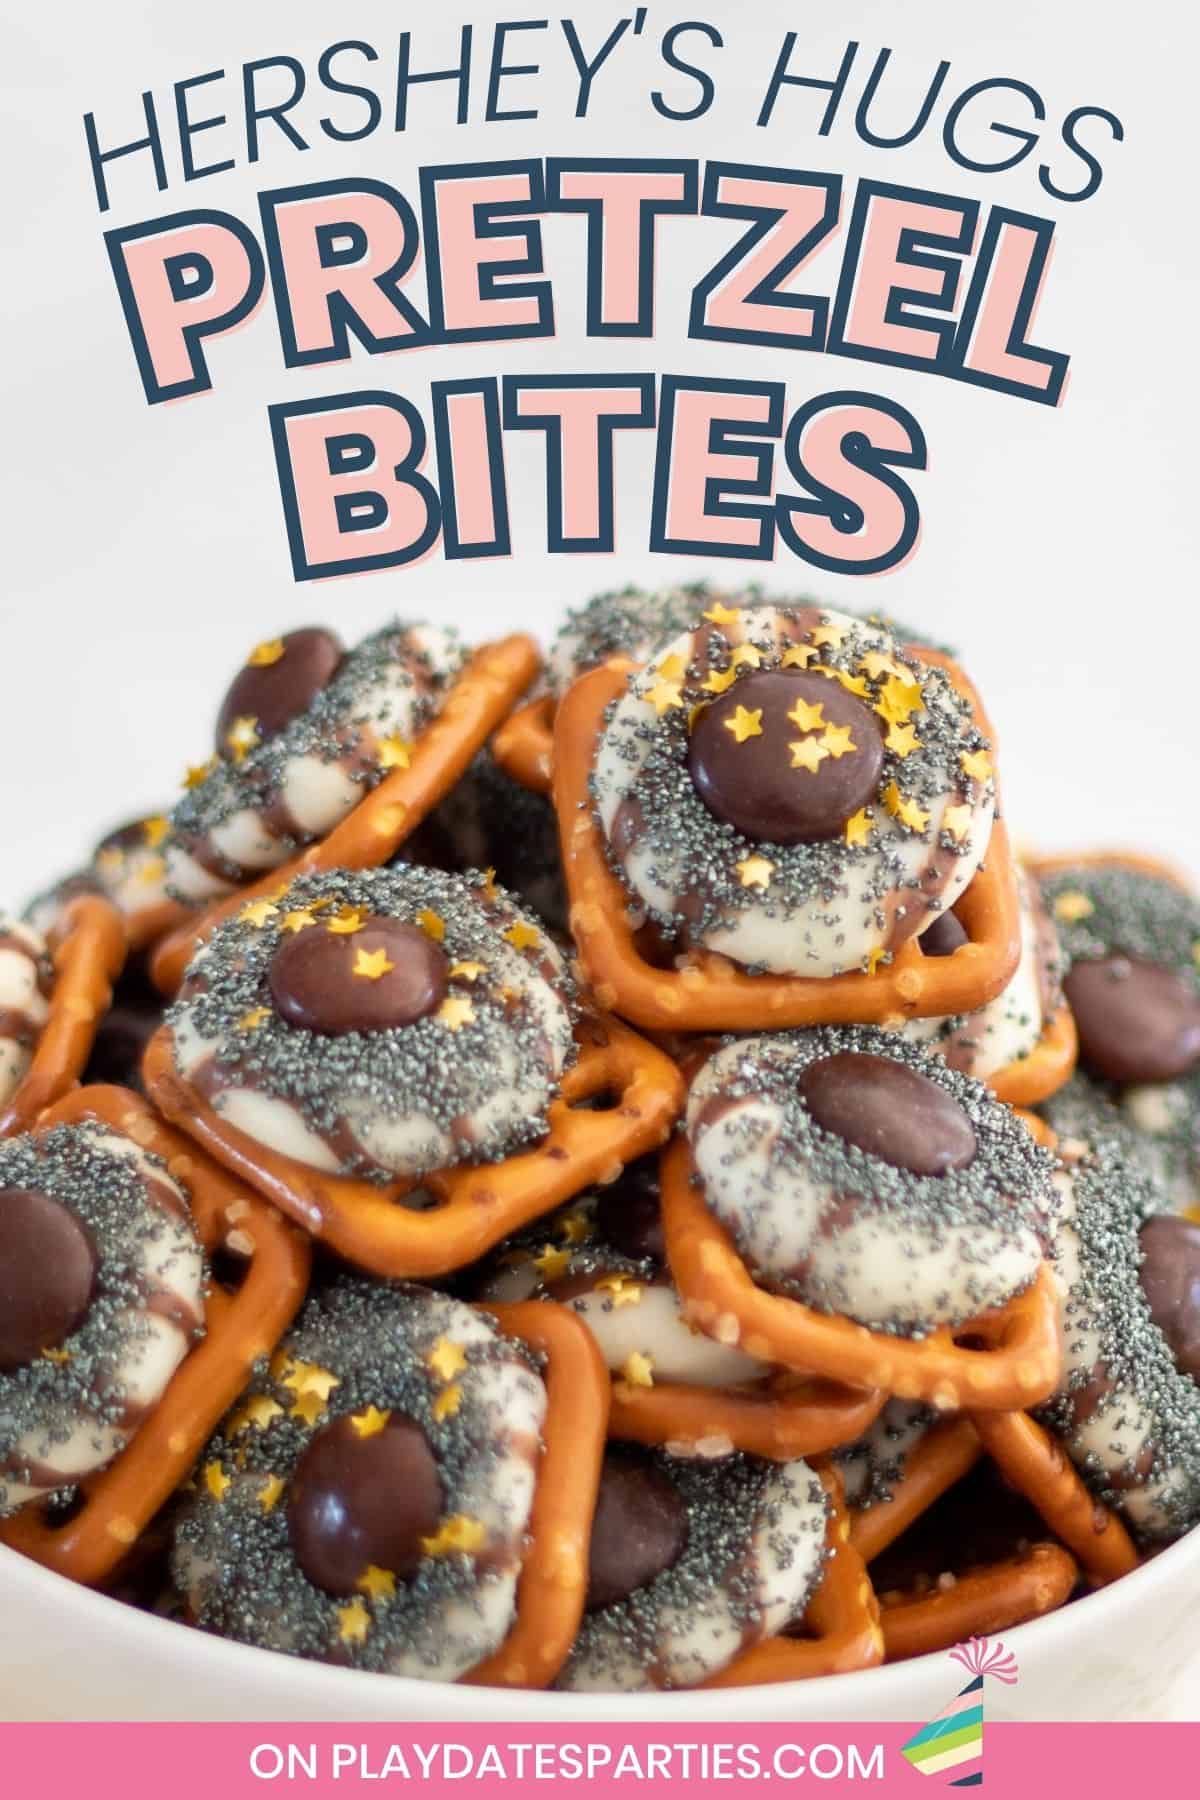 Close up of a bowl filled with chocolate pretzels and text overlay Hershey's Hugs pretzel bites.